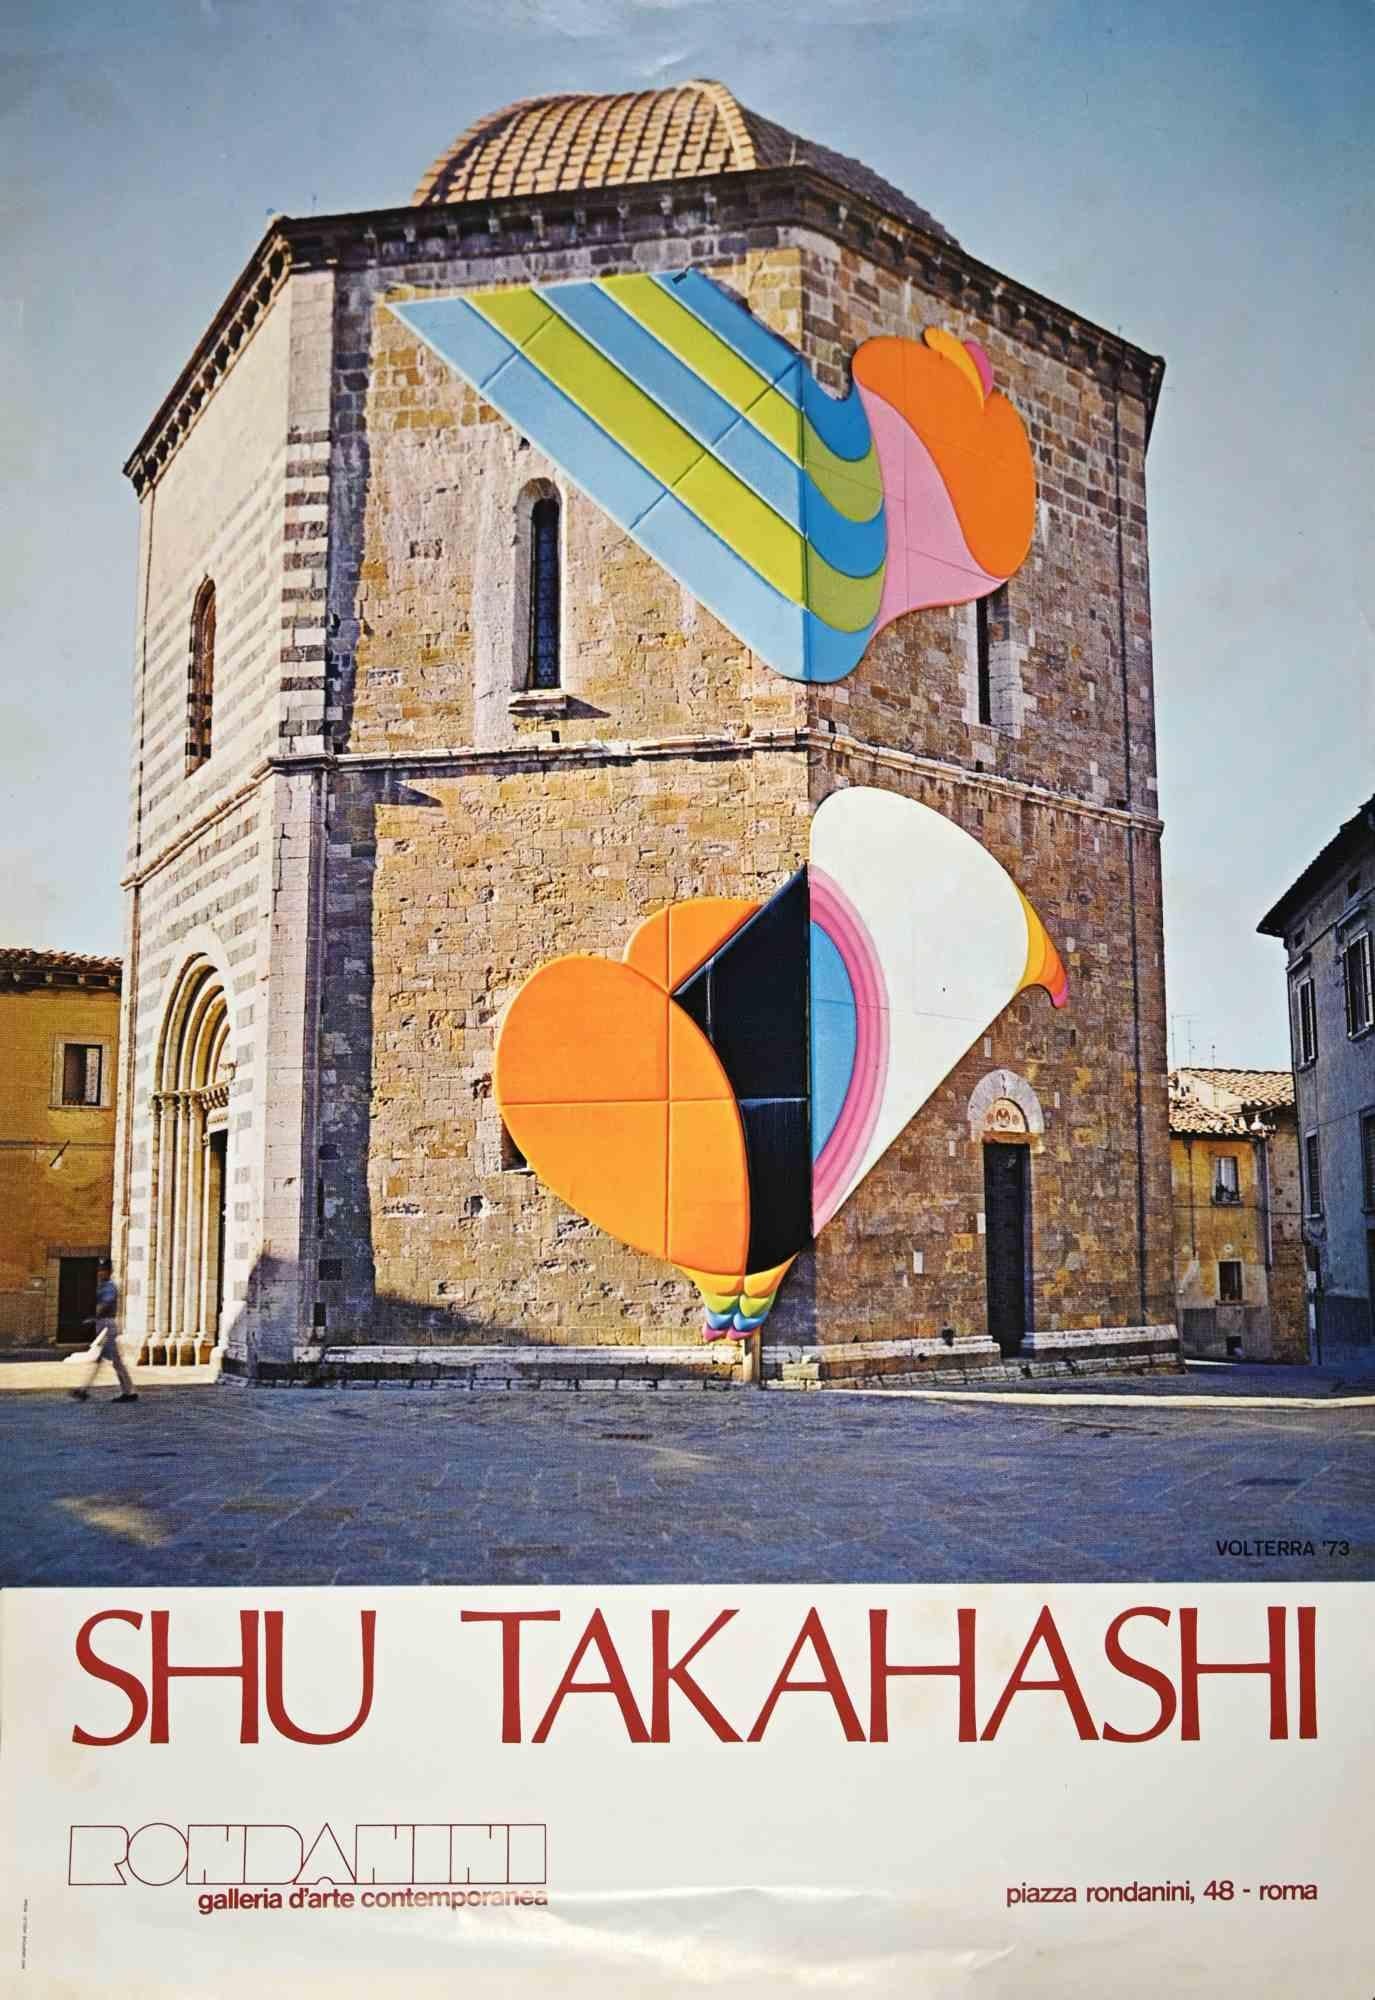 Vintage Poster Exhibition in Volterra -  Poster by Shu Takahashi - 1973